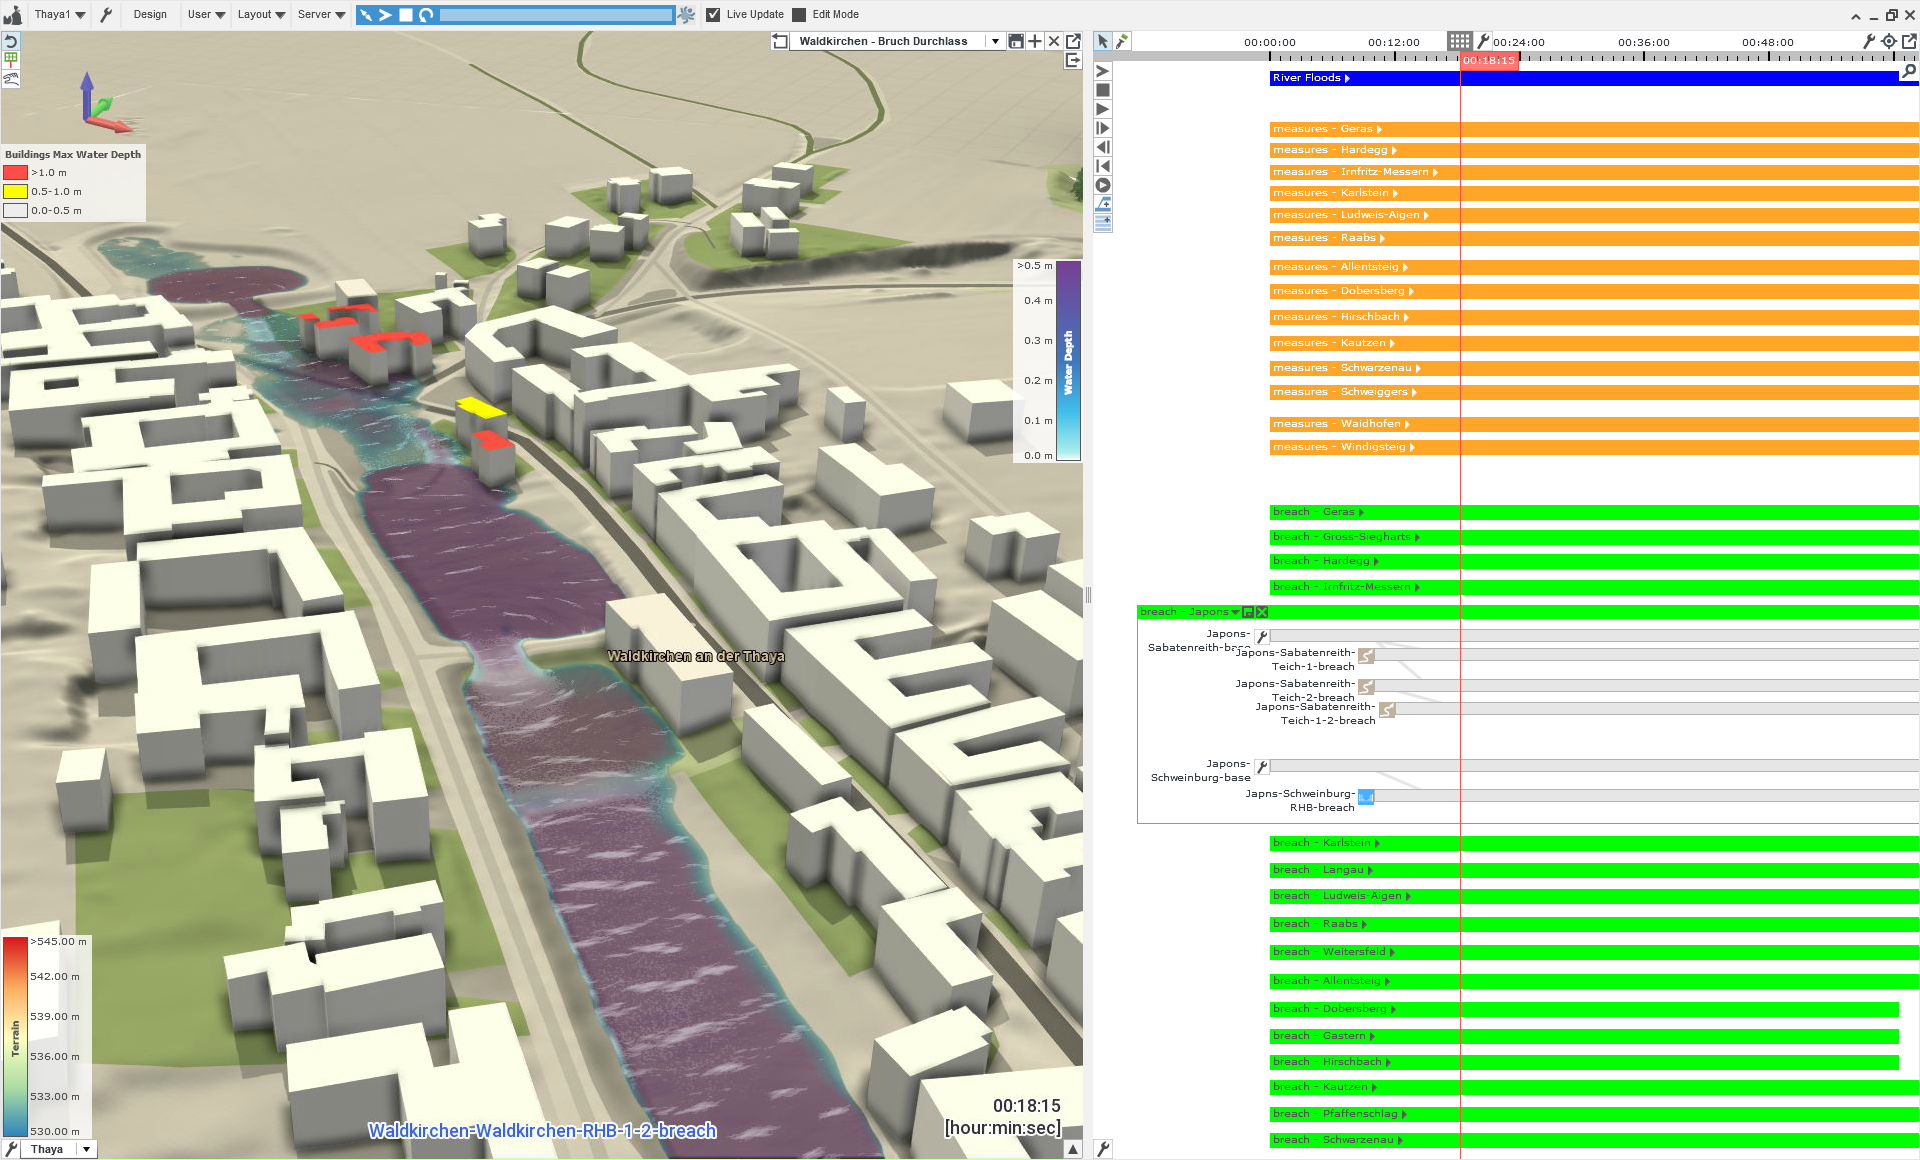 Screenshot of software Visdom. Left the visualization of a city next to a river. On the right is a Dashboard where the user can plan various possibilities and scenarios with heavy rainfall events, river floods, levee breaches and protection measures.